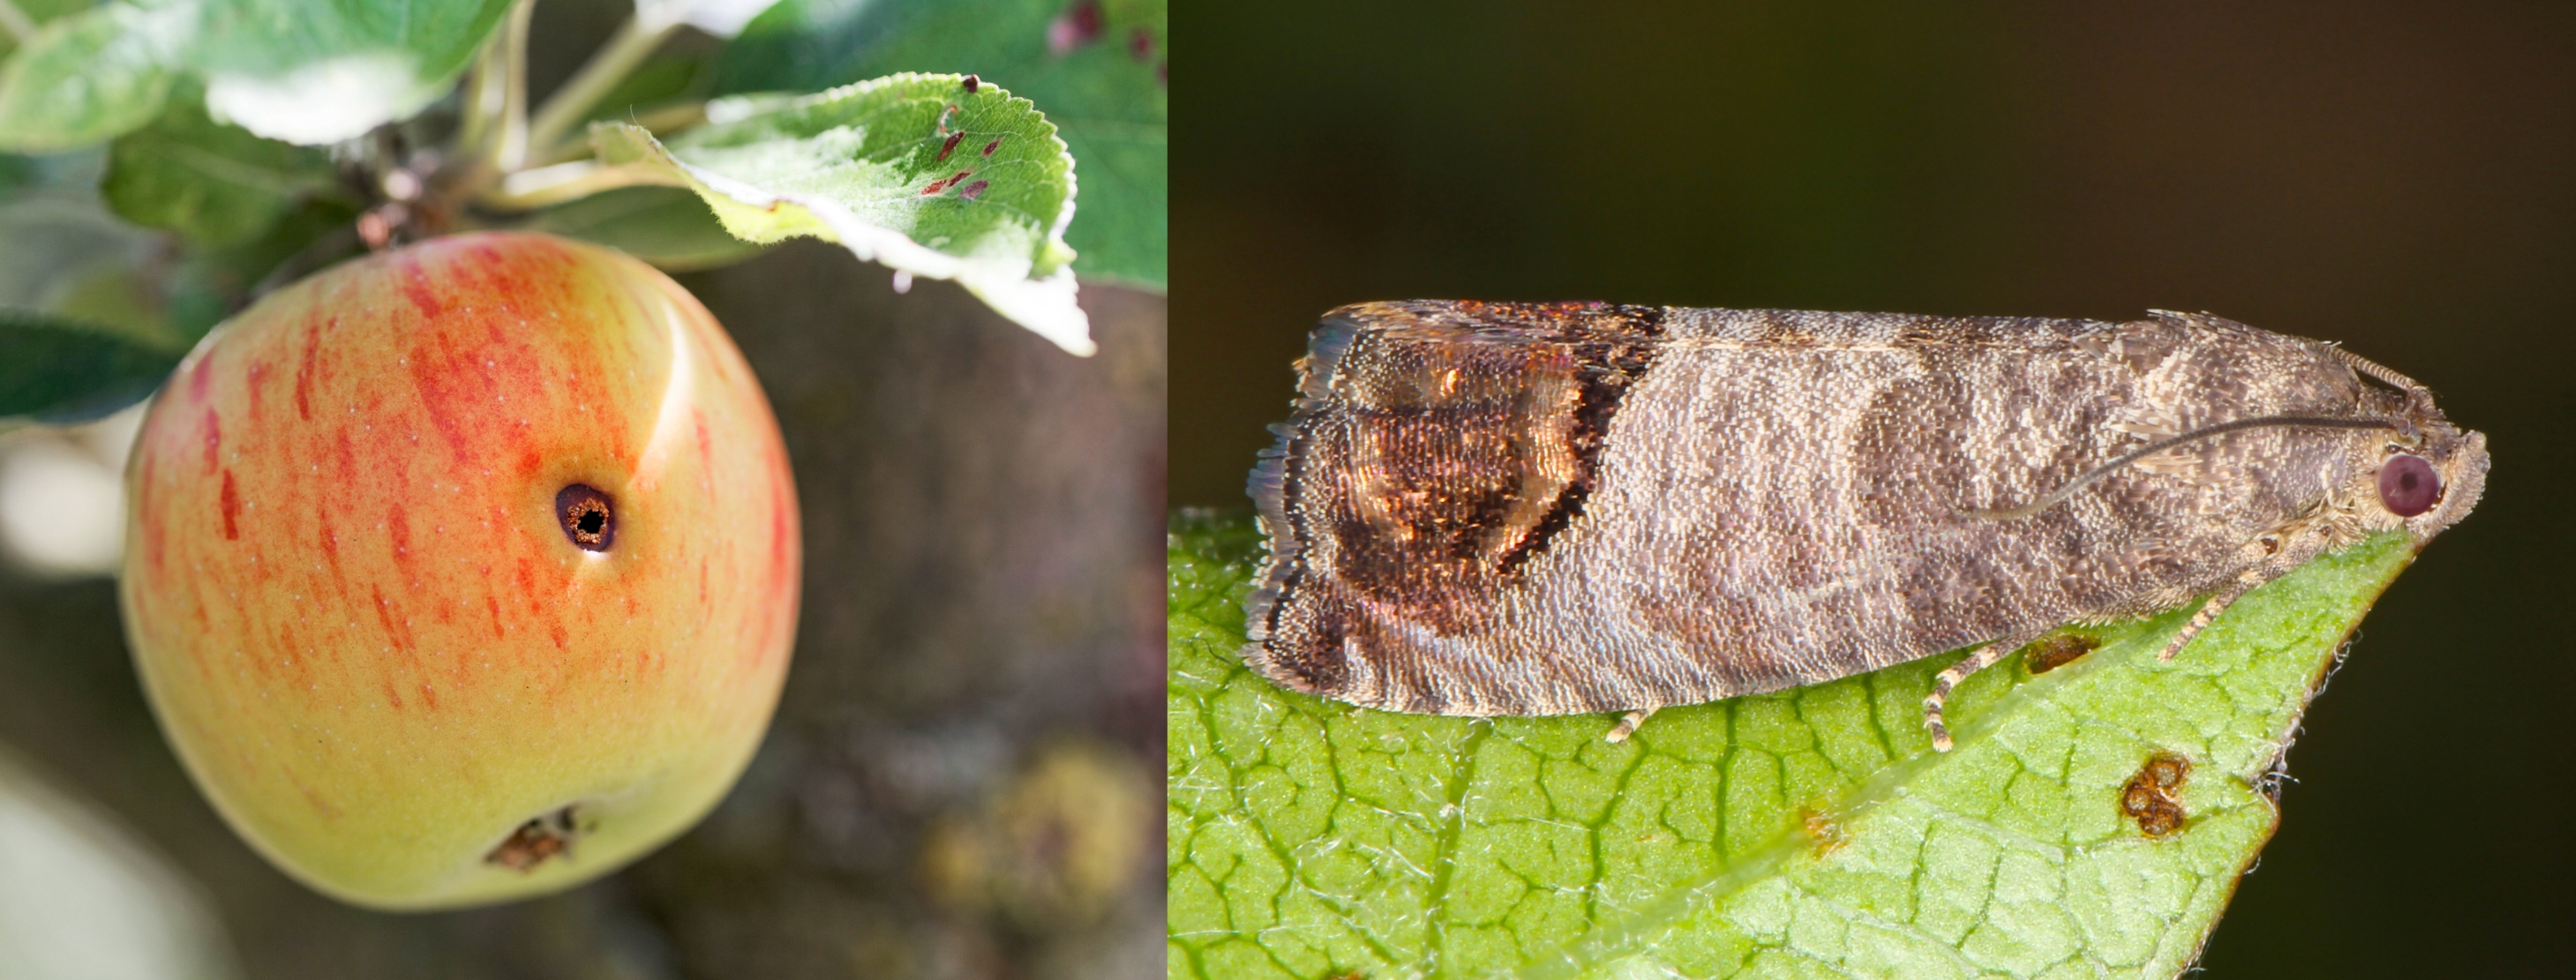 The invasive Codling Moth's sting on an apple, an all to common sight for farmers.